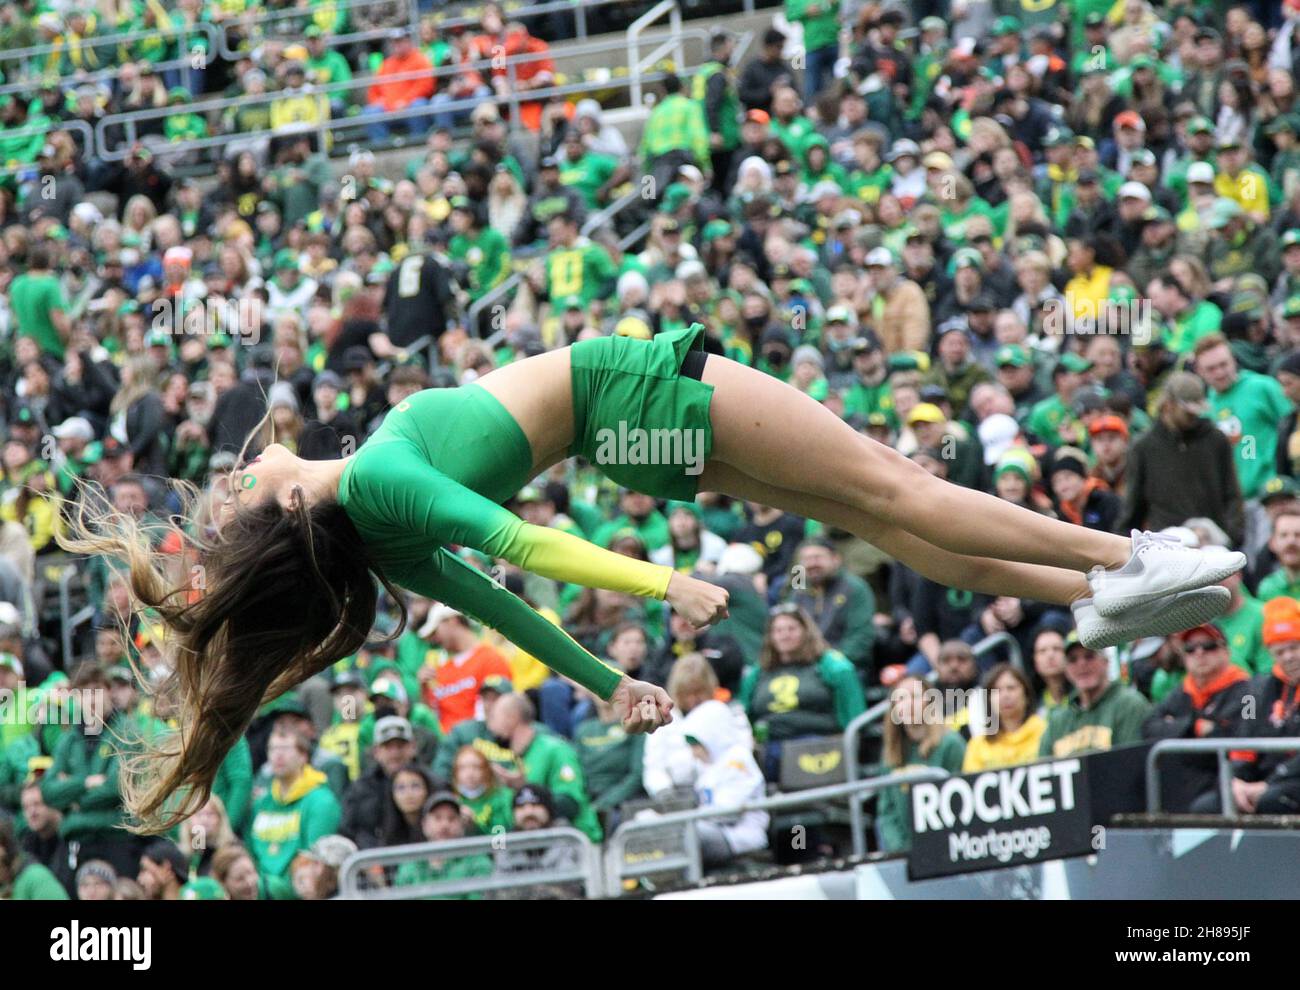 Autzen Stadium, Eugene, OR, USA. 27th Nov, 2021. An Oregon Duck cheerleader flies high during the first half of the NCAA football game between the Oregon State Beavers and the Oregon Ducks at Autzen Stadium, Eugene, OR. Larry C. Lawson/CSM (Cal Sport Media via AP Images). Credit: csm/Alamy Live News Stock Photo